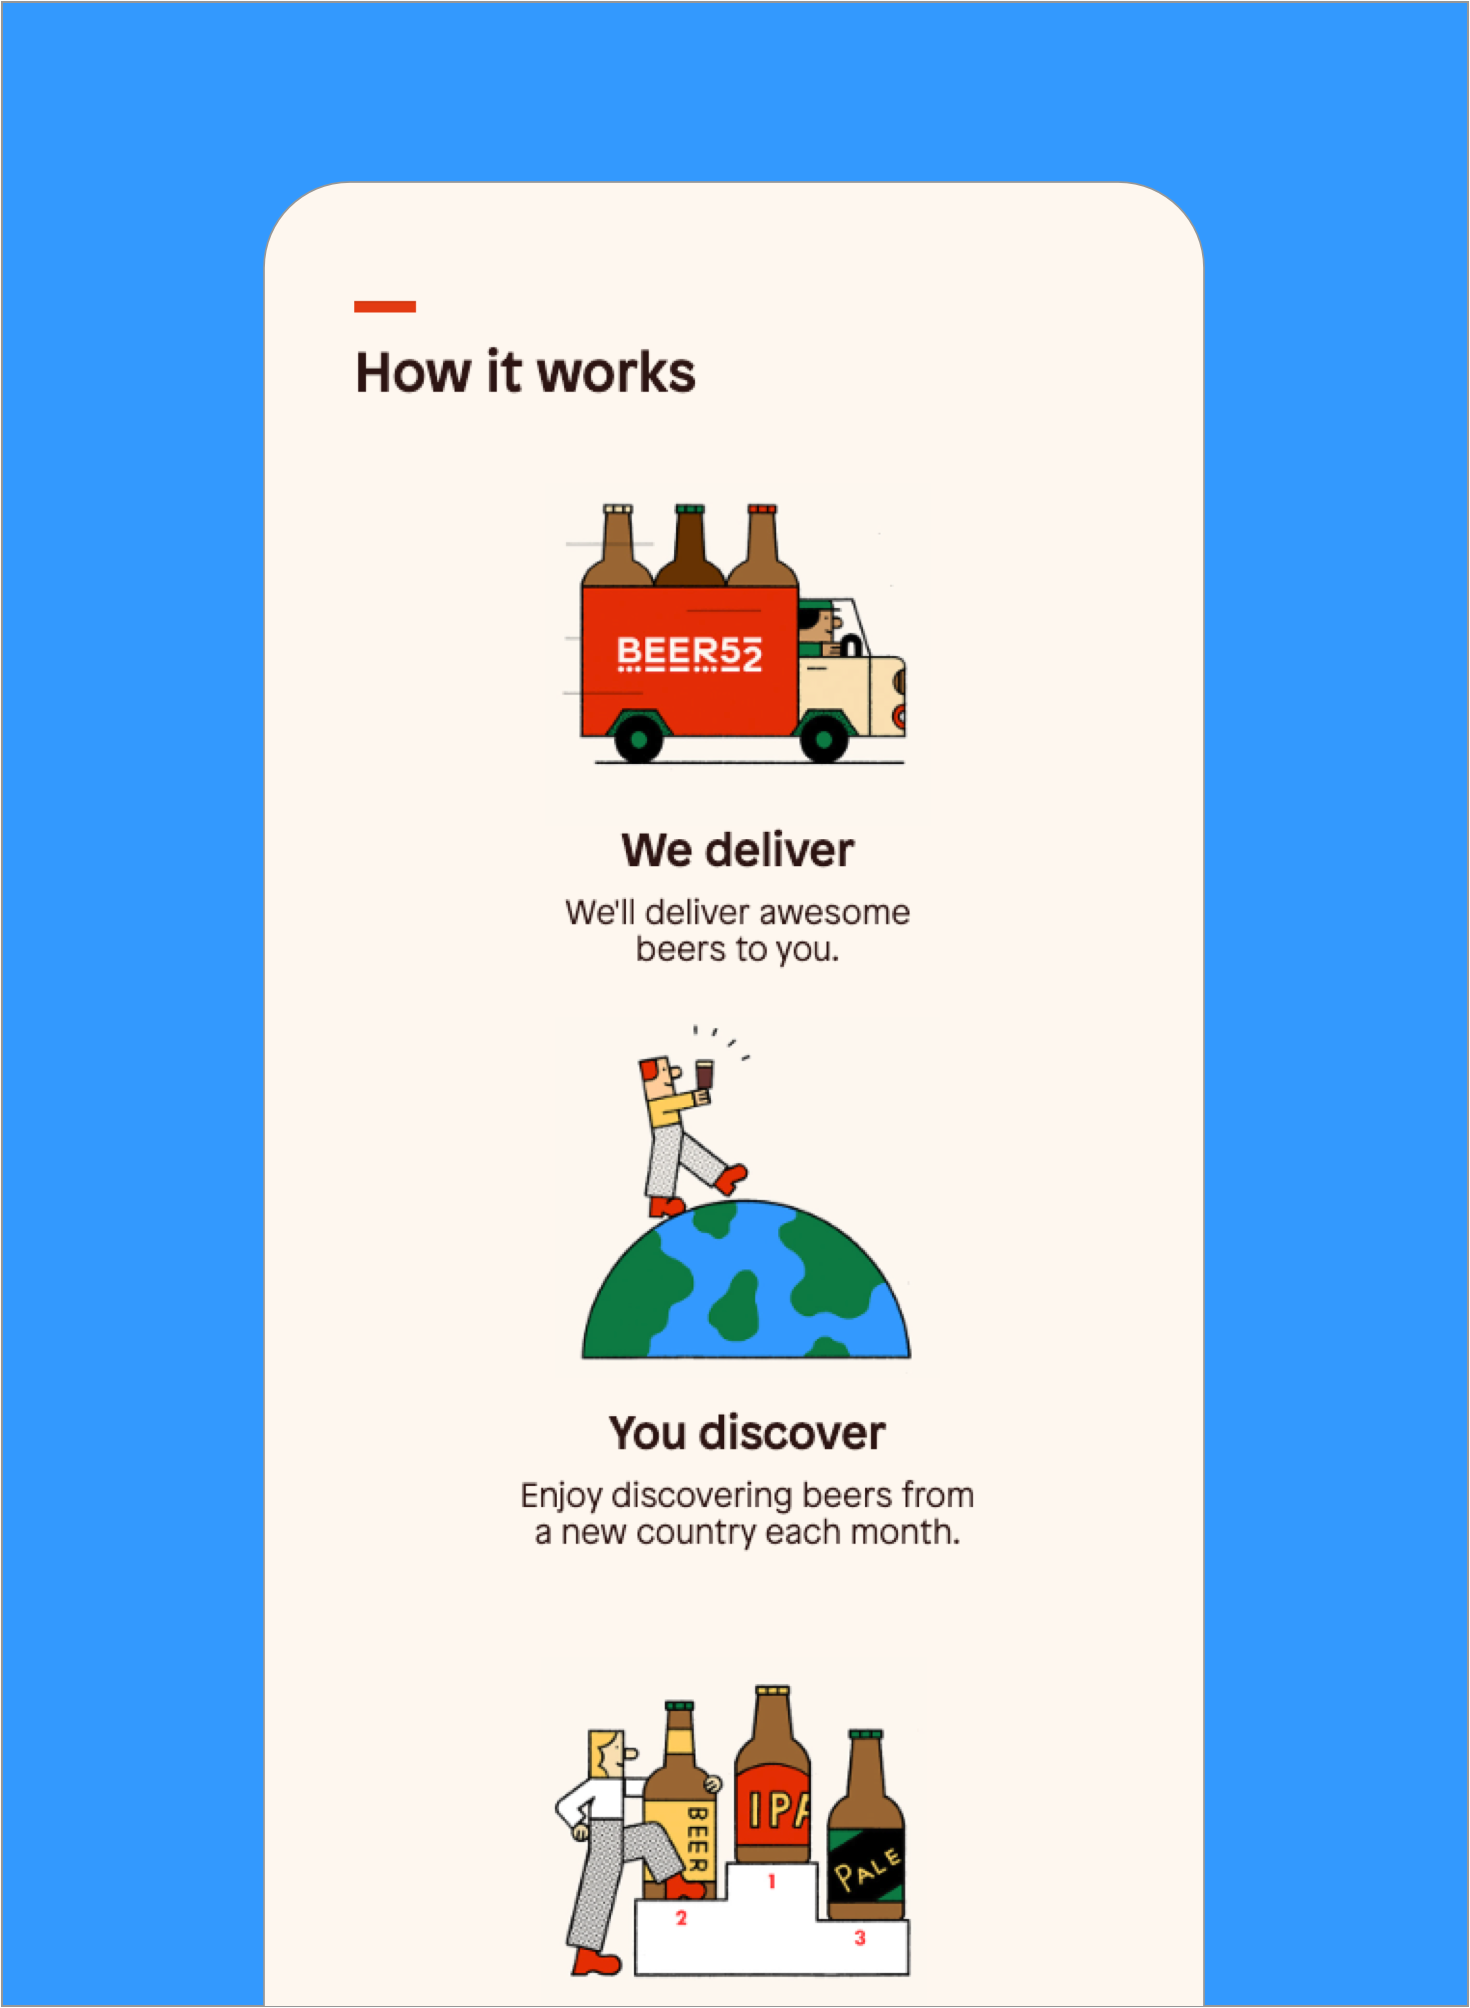 A mobile phone style screen depicts the Beer52 Time “How it works” page on a blue background. There are three illustrations on the page of a truck, someone walking on the Earth and bottles on a winners’ podium